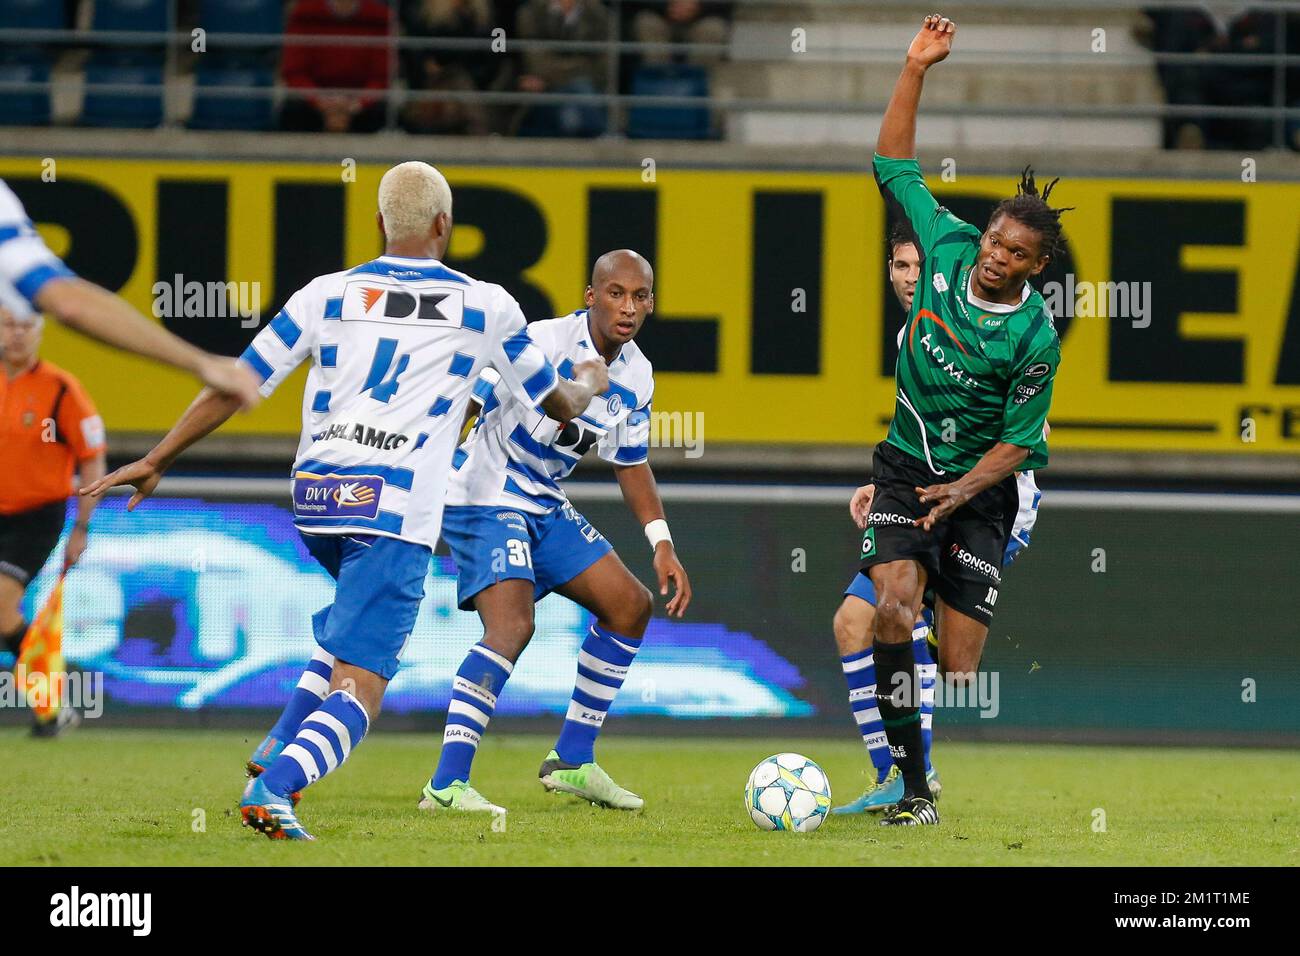 20131025 - GENT, BELGIUM: Cercle's Michael Uchebo pictured during the Jupiler Pro League match between KAA Gent and Cercle Brugge, in Gent, Friday 25 October 2013, on day 12 of the Belgian soccer championship. BELGA PHOTO BRUNO FAHY Stock Photo